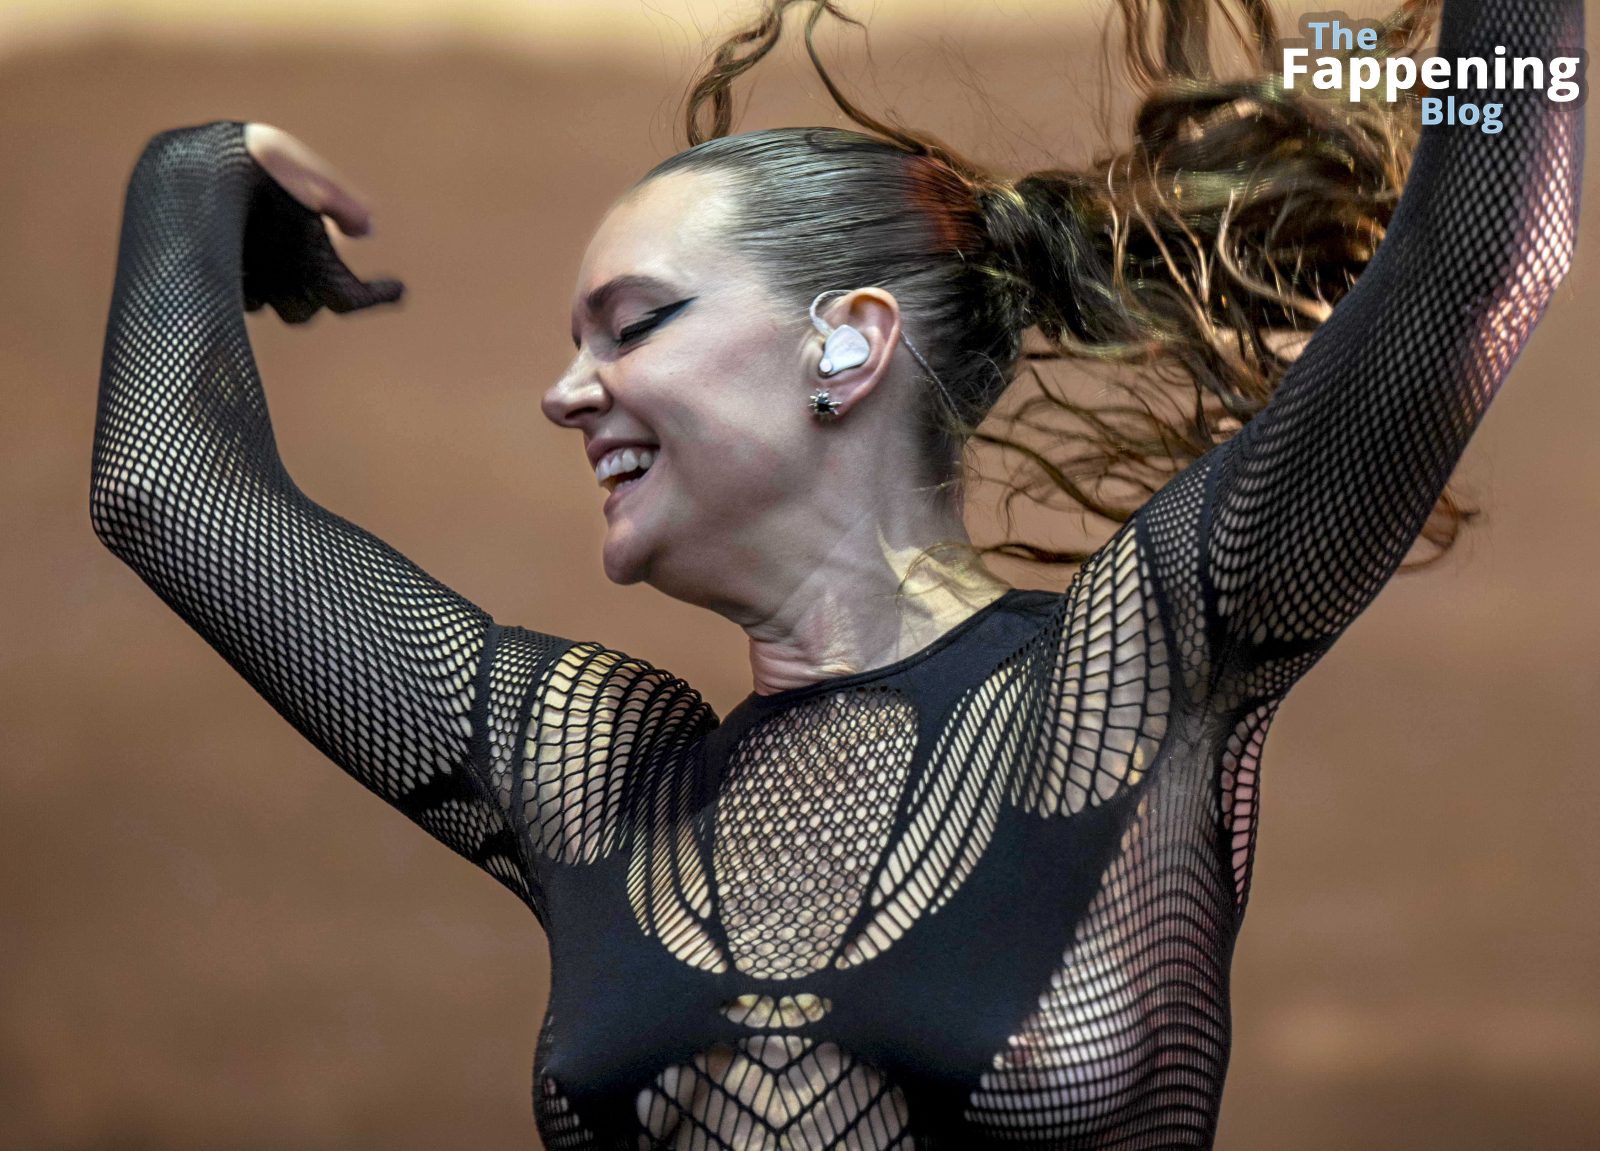 Tove-Lo-Way-Out-West-Festival-Sexy-Fishnet-Boobs-Nipples-8-thefappeningblog.com_.jpg